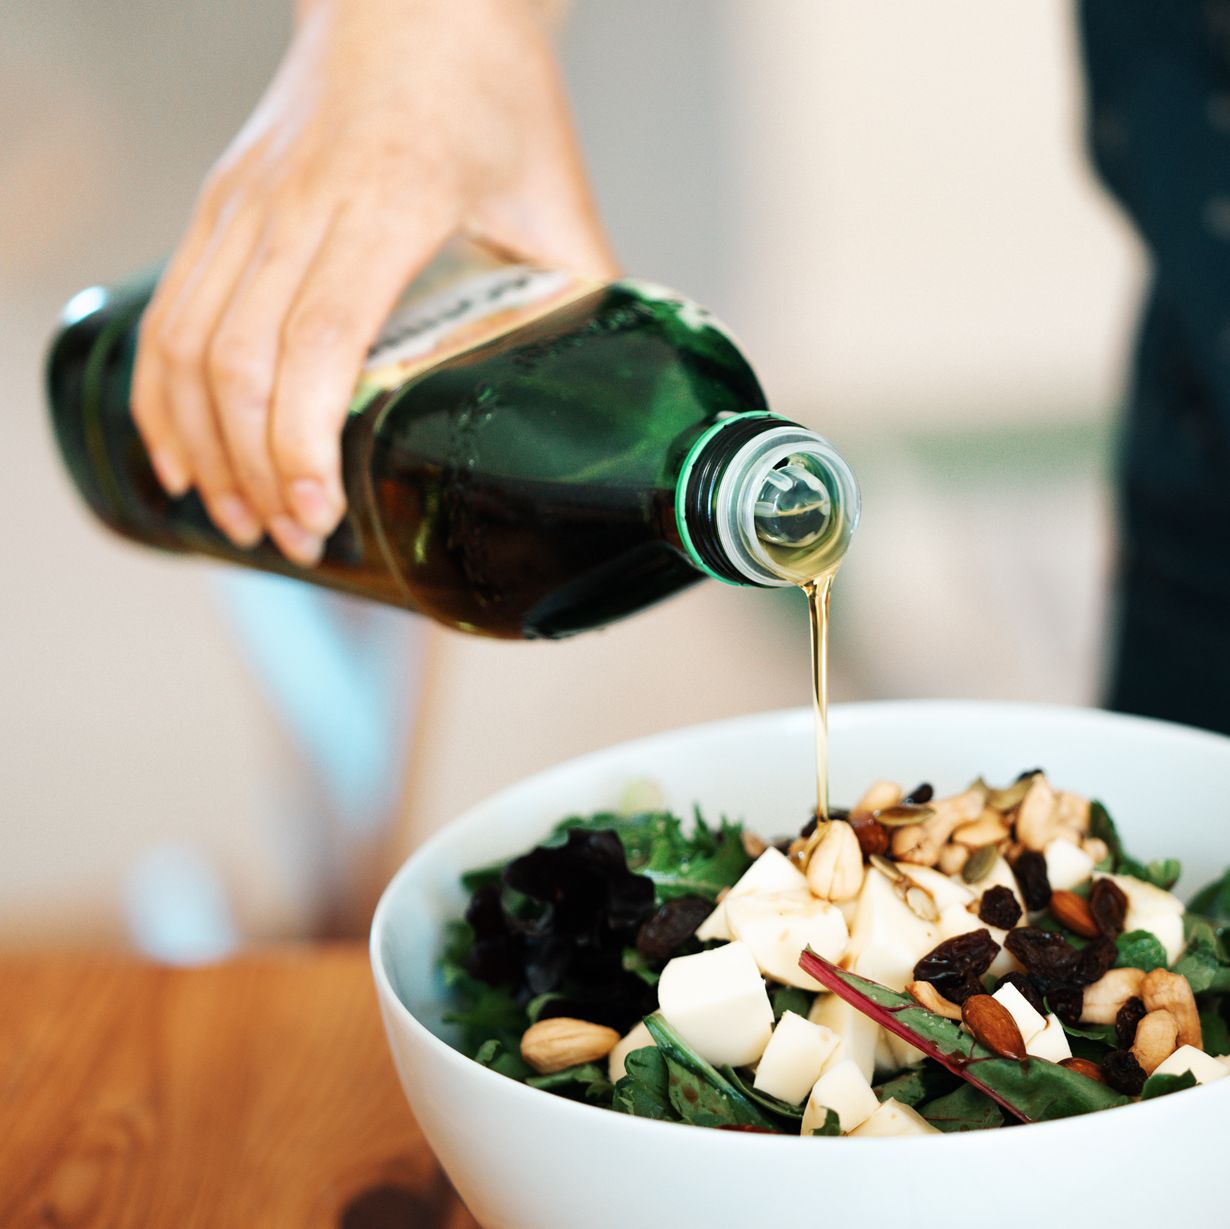 These Gourmet Olive Oils Will Take Salad Dressings, Marinades, and More to New Heights